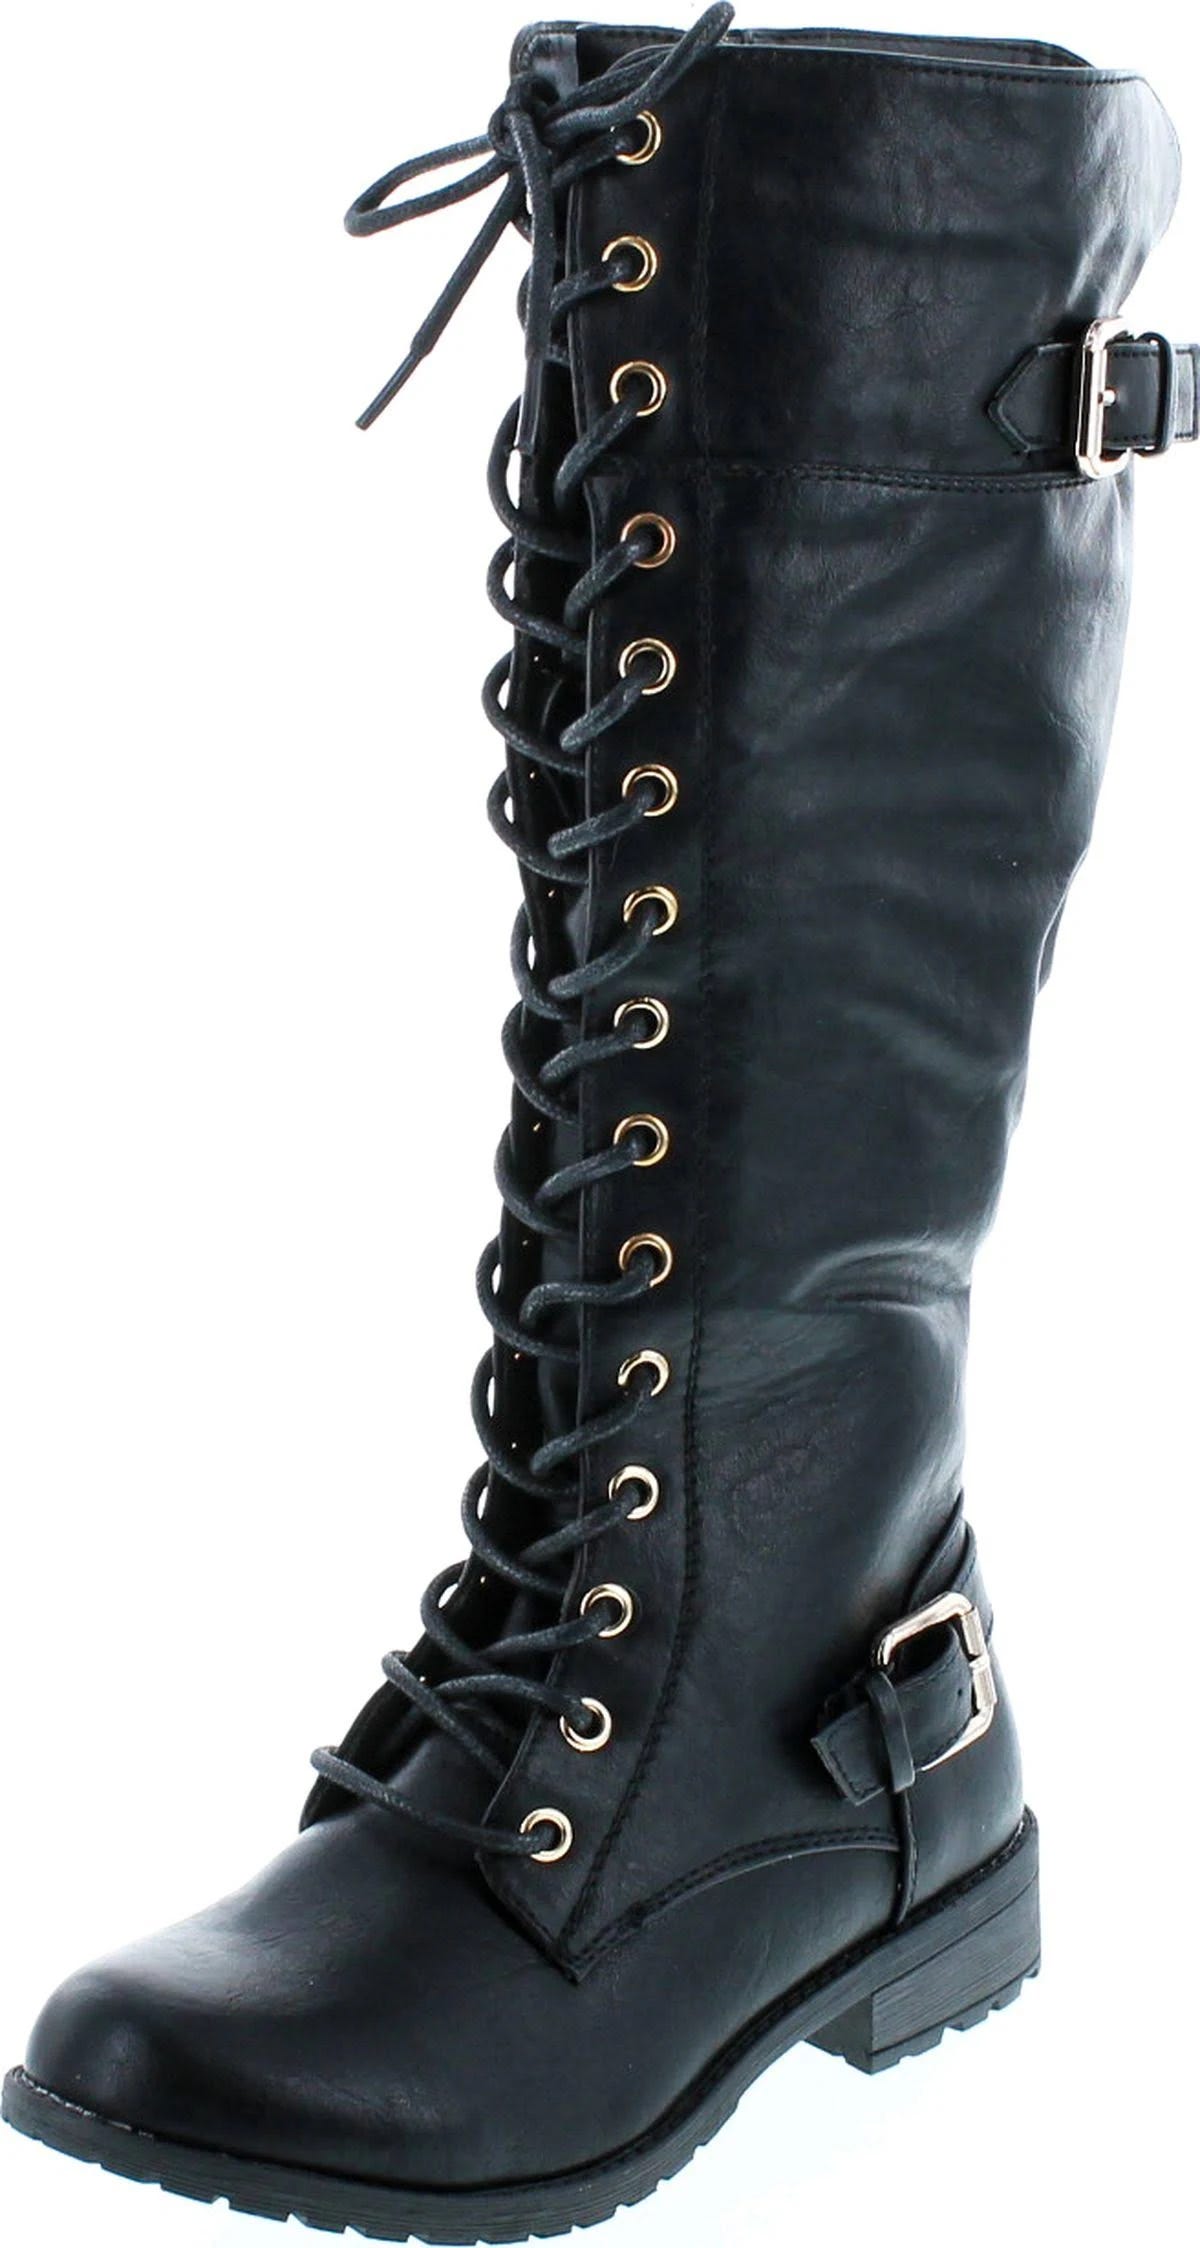 Stylish Women's Knee-High Combat Boots with Padded Footbed and Buckle Detail | Image